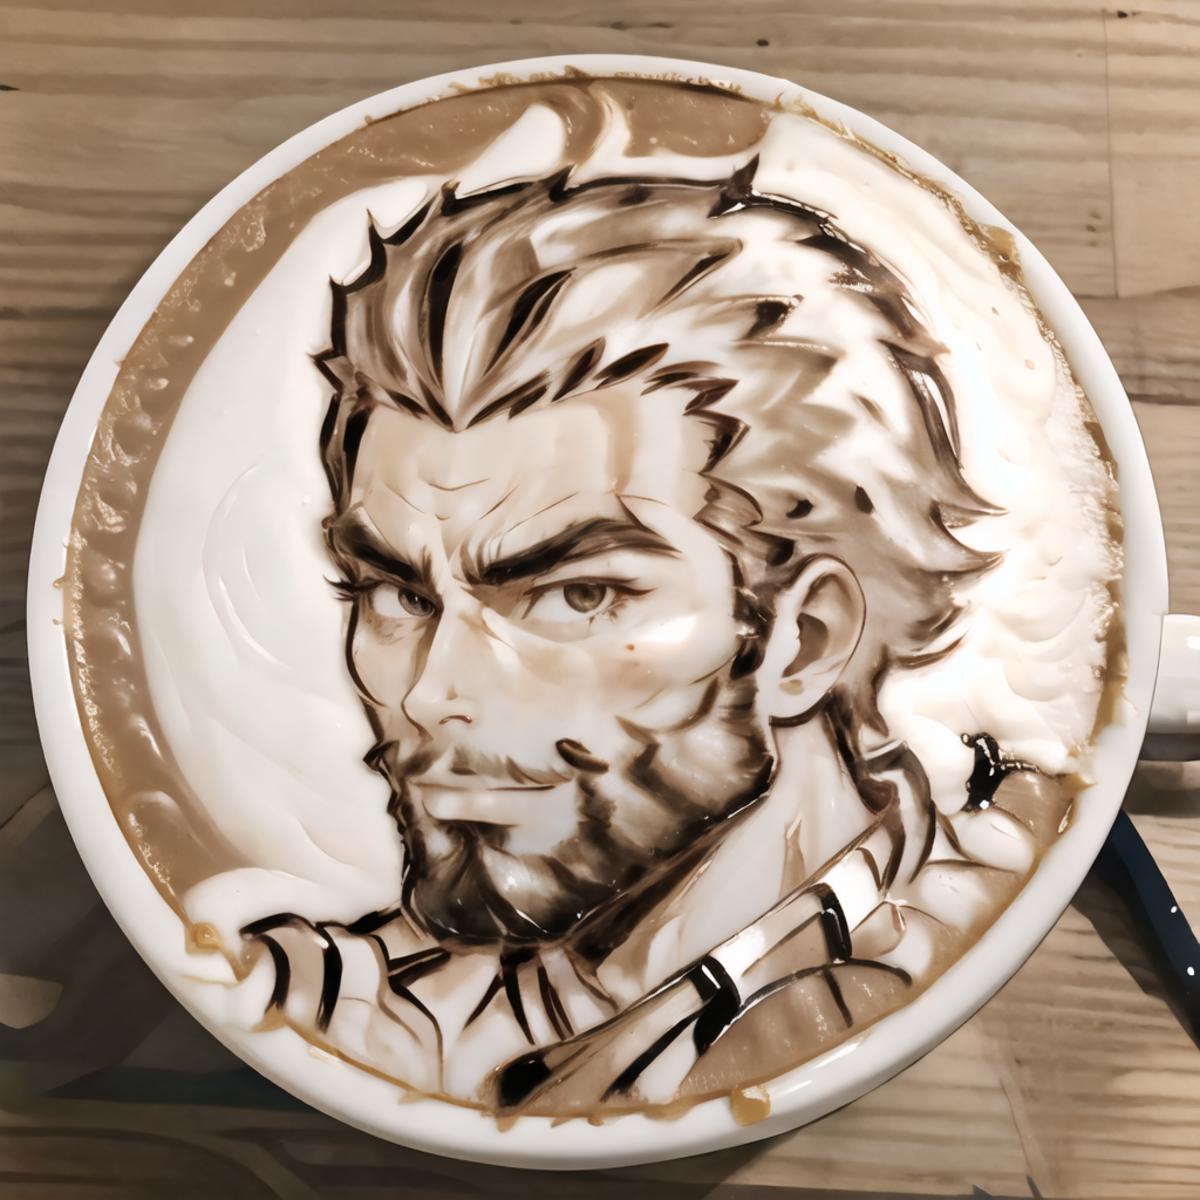 A mug of coffee with a drawing of a man with a wavy hairstyle.